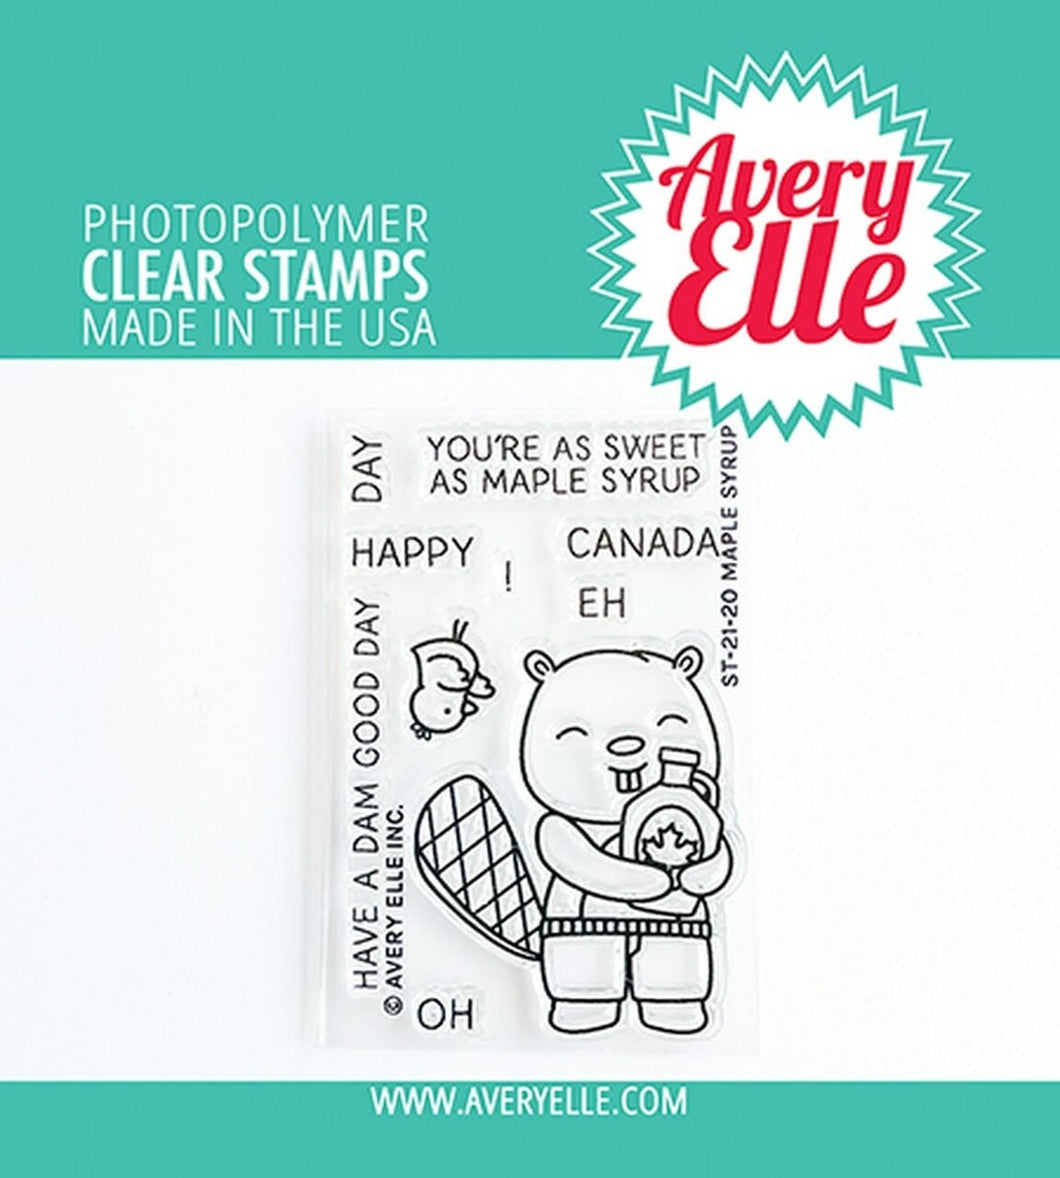 Avery Elle Clear Photopolymer Rubber Stamp Set - Maple Syrup